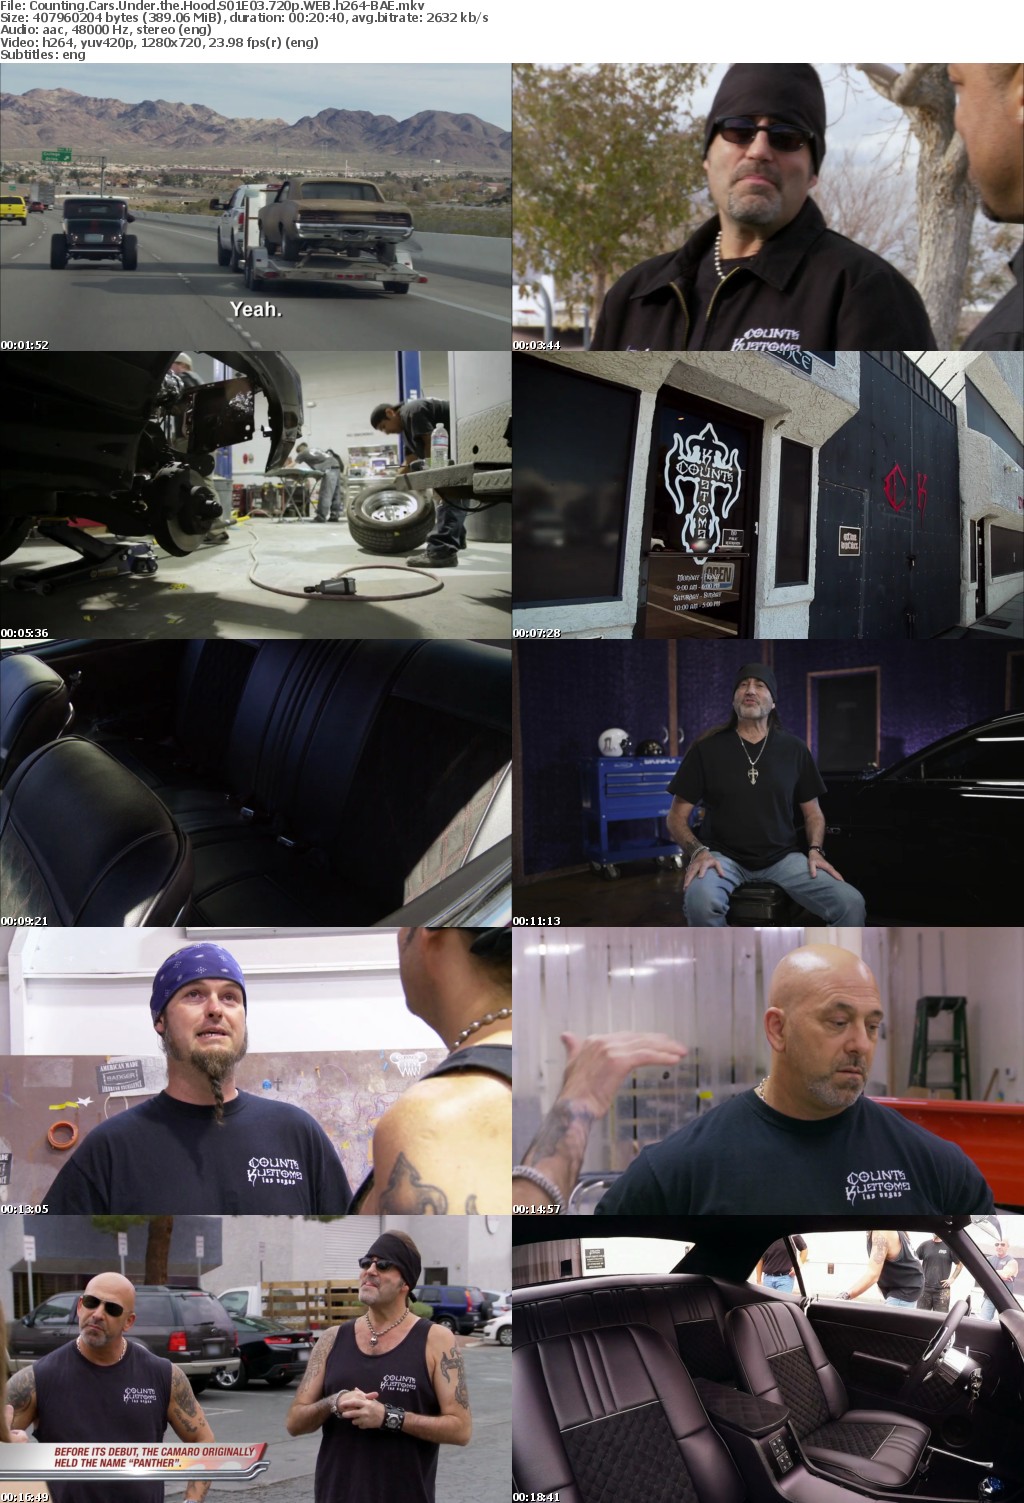 Counting Cars Under the Hood S01E03 720p WEB h264-BAE